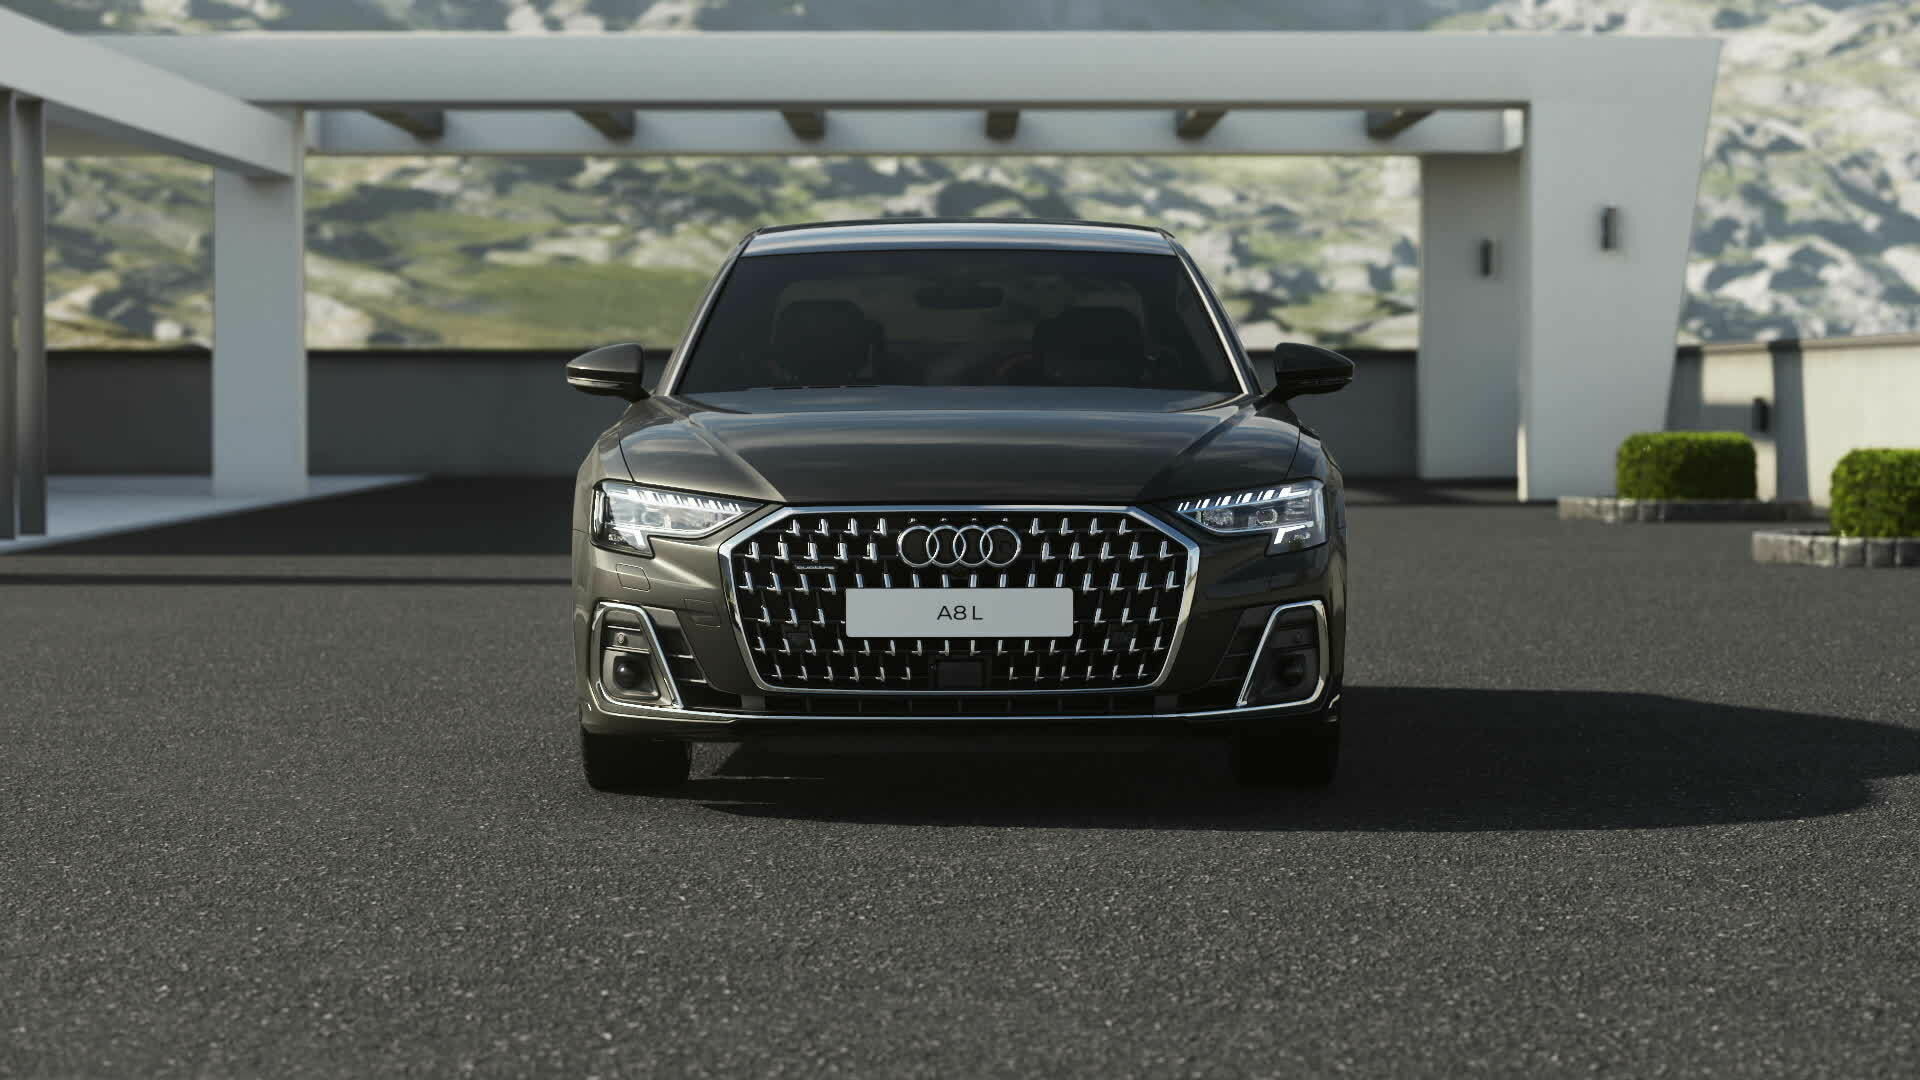 Animation: Exterior design of the Audi A8 L